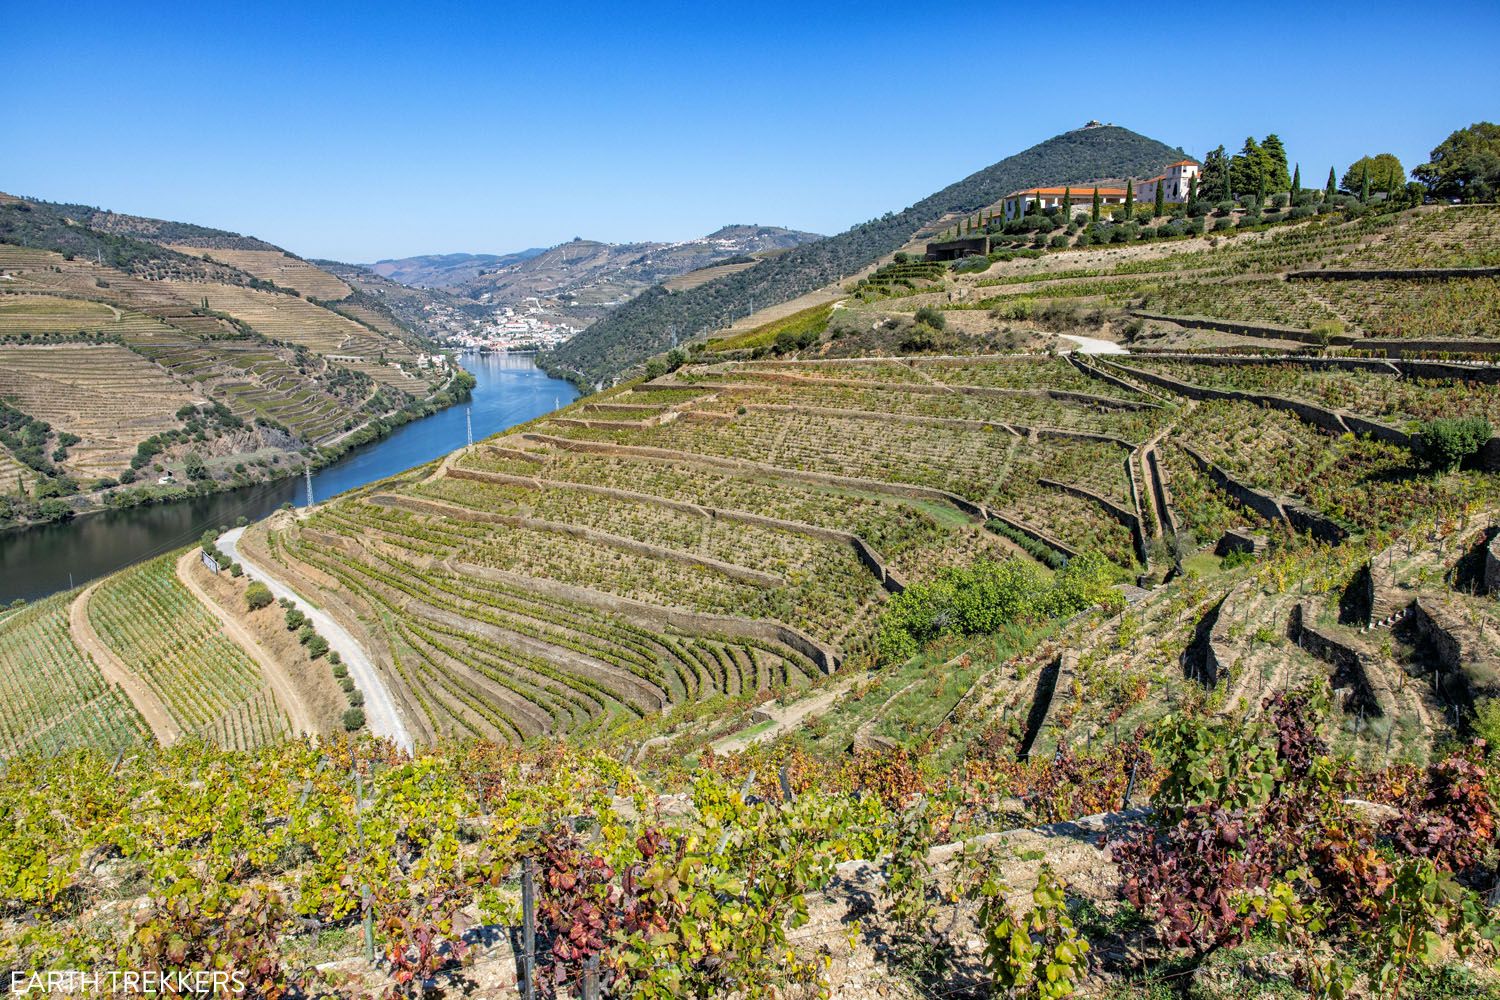 How to Visit the Douro Valley